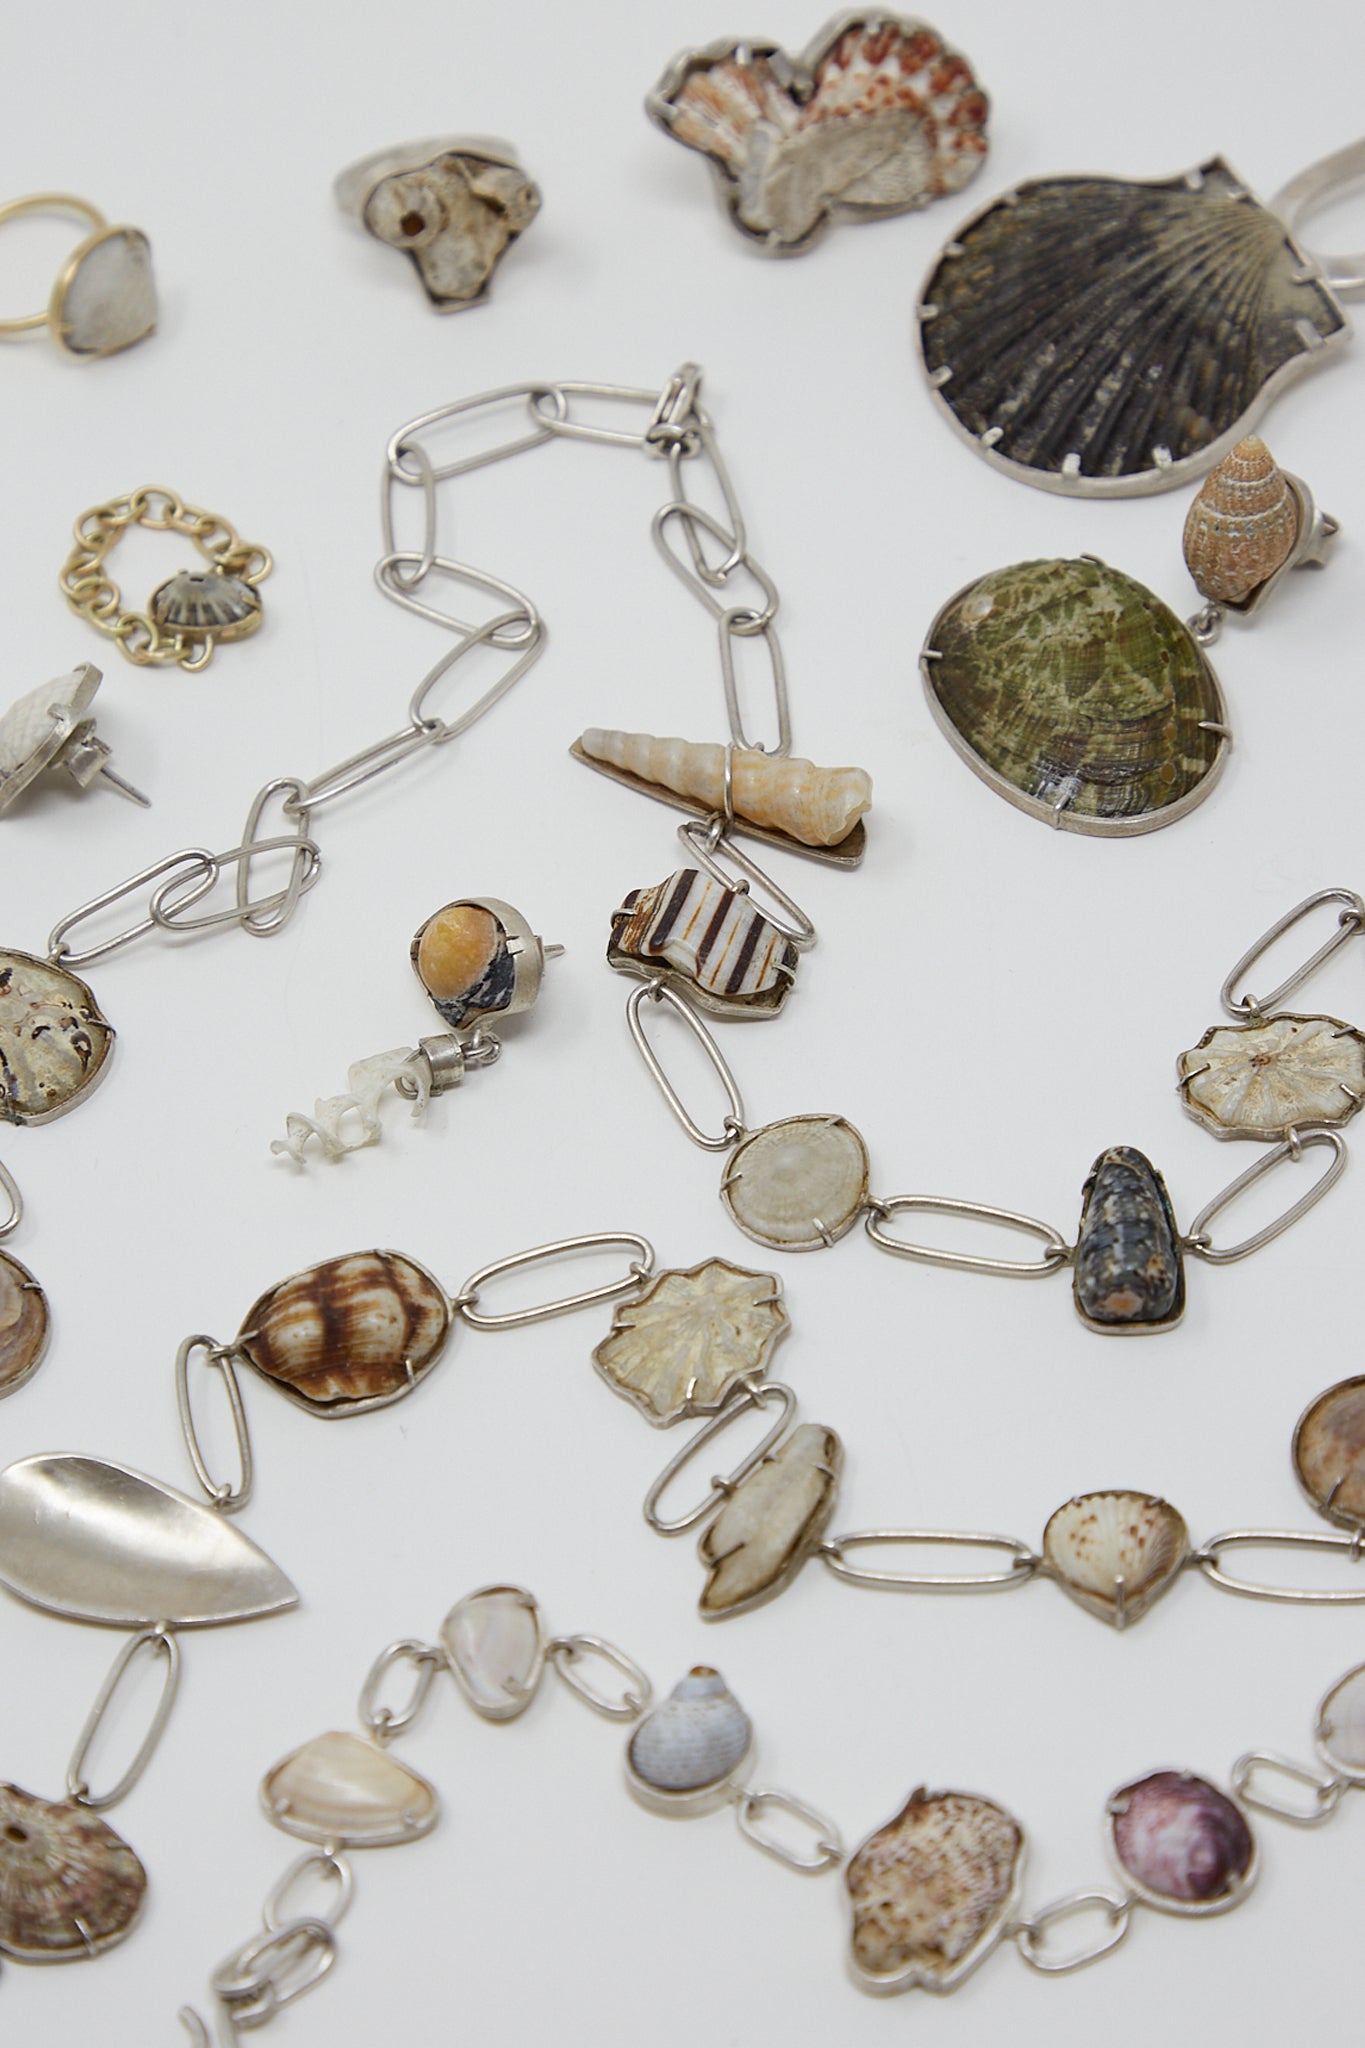 A collection of one-of-a-kind La Ma r jewelry, crafted with the Sterling Silver Bracelet 001 A and found shells.